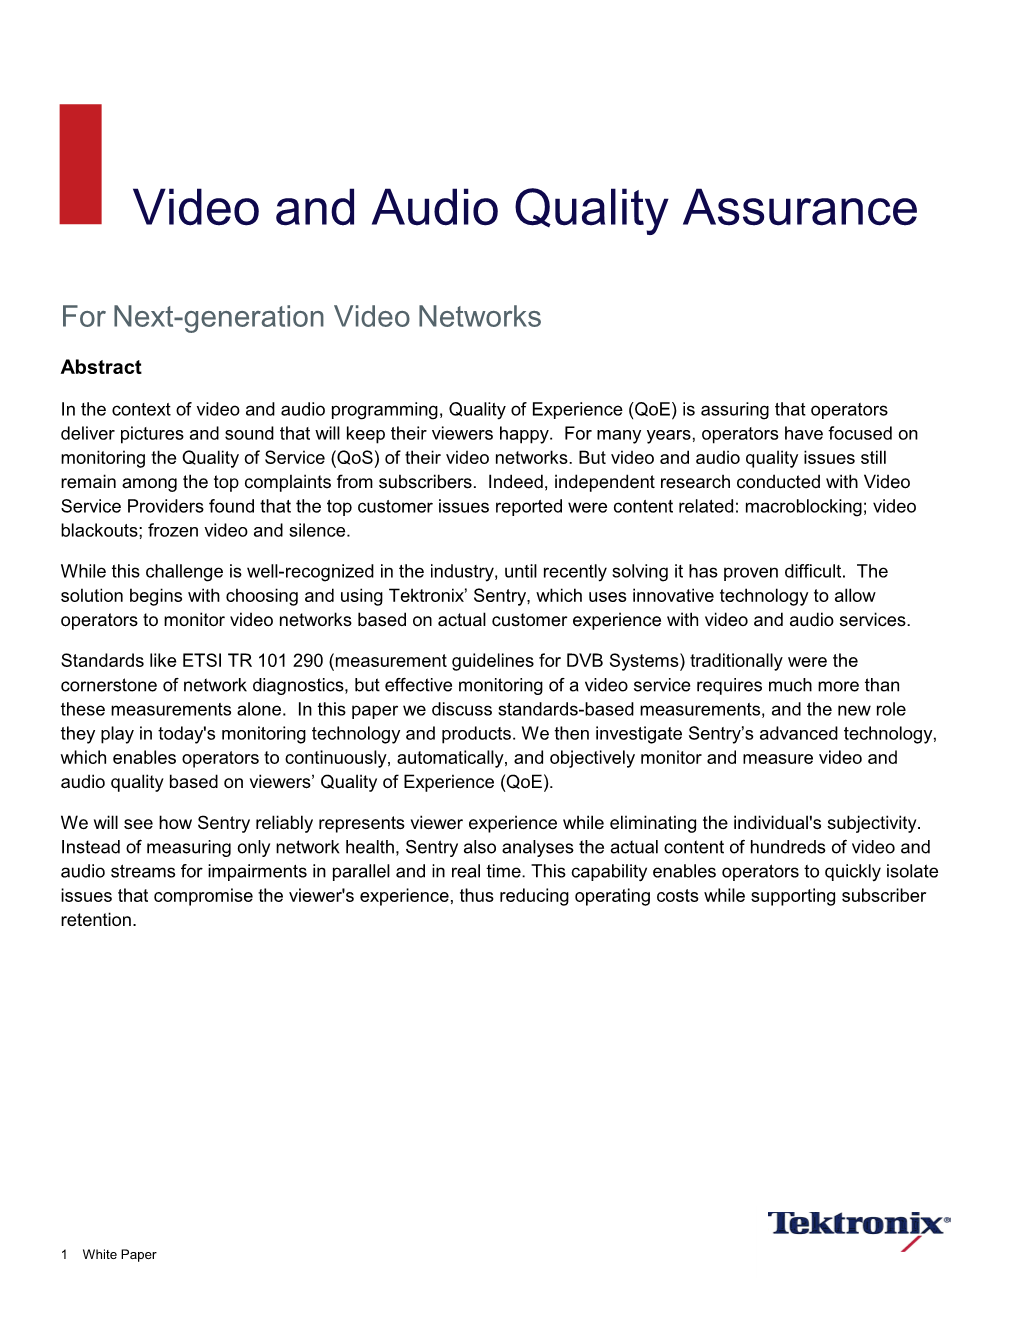 Video and Audio Quality Assurance